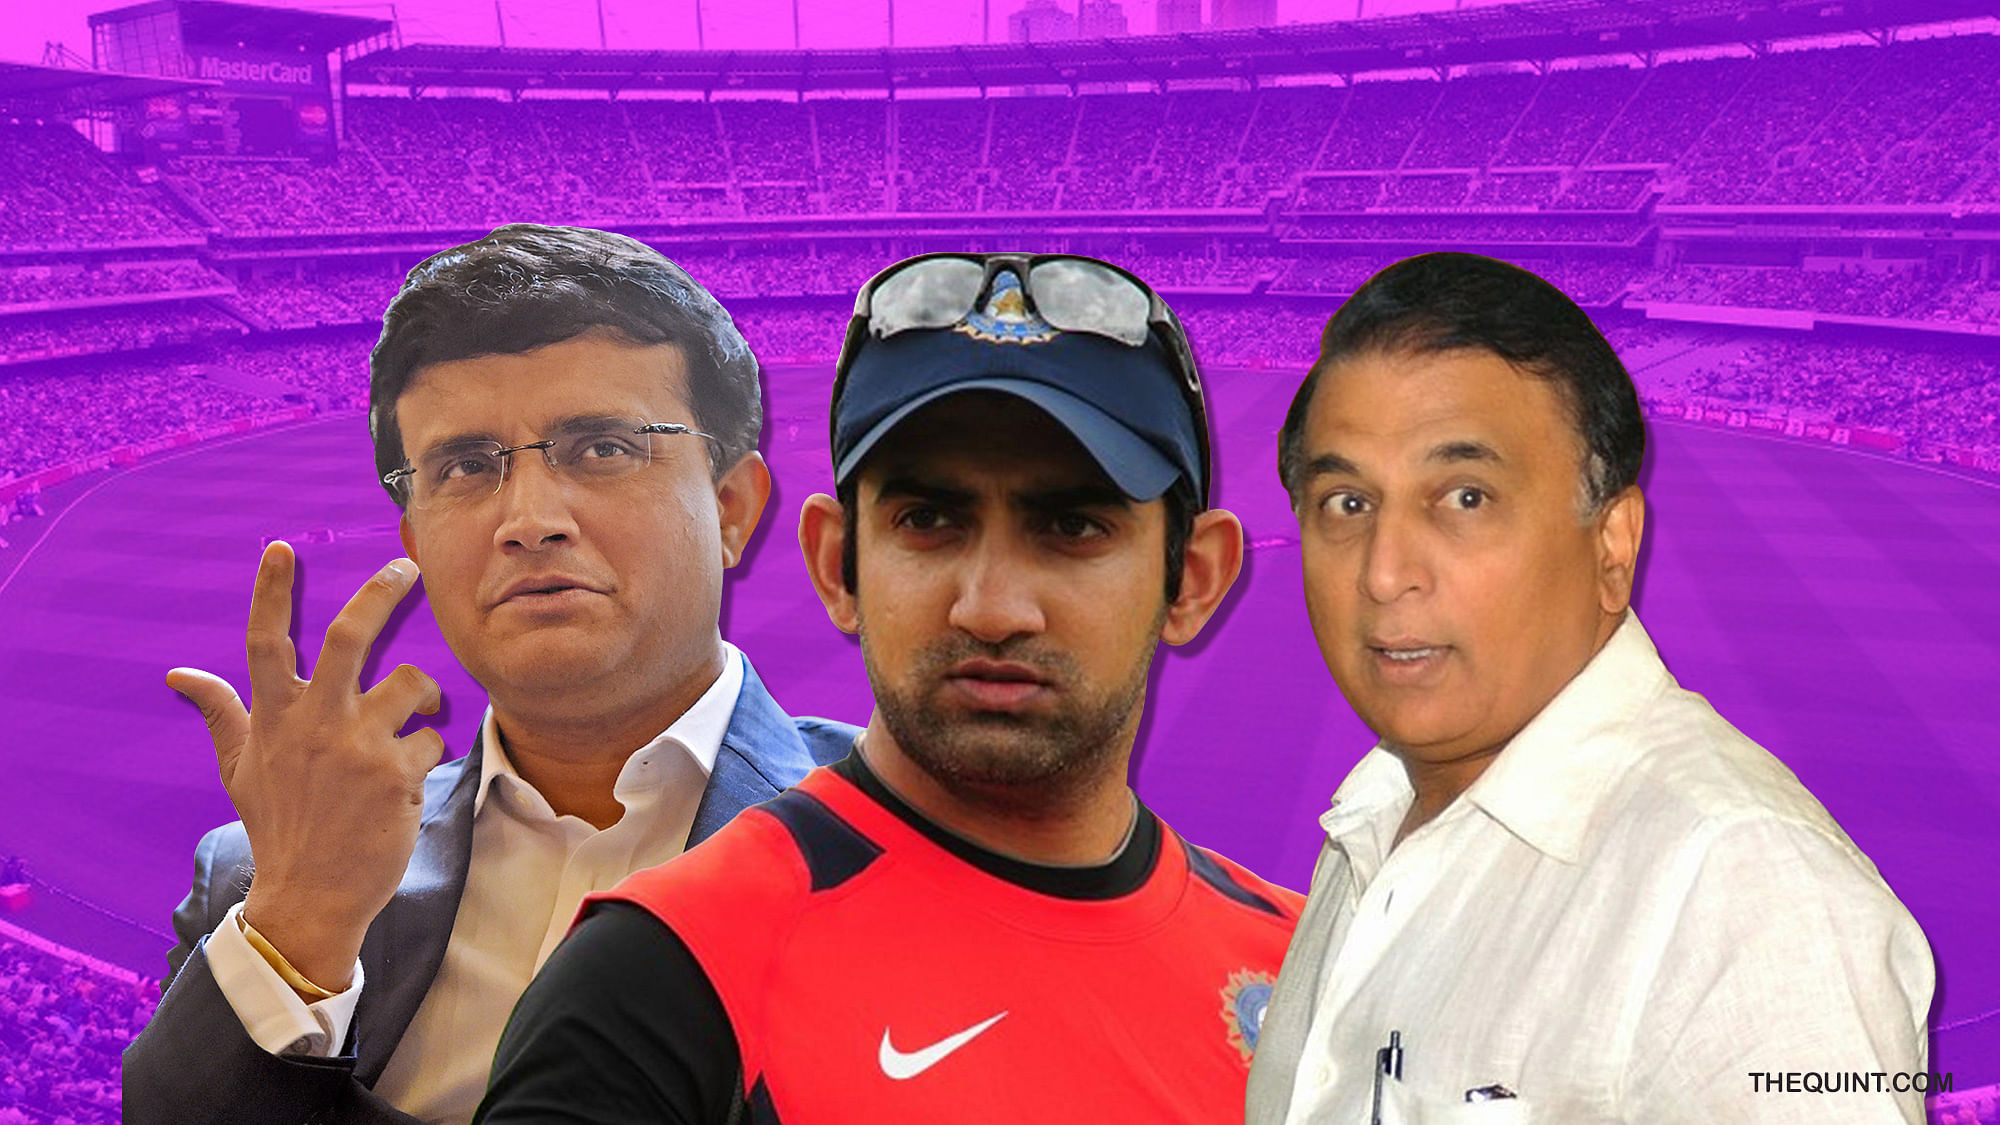 Cricketers Sourav Ganguly, Gautam Gambhir and Sunil Gavaskar’s conflict of interest issues have come under the scanner.